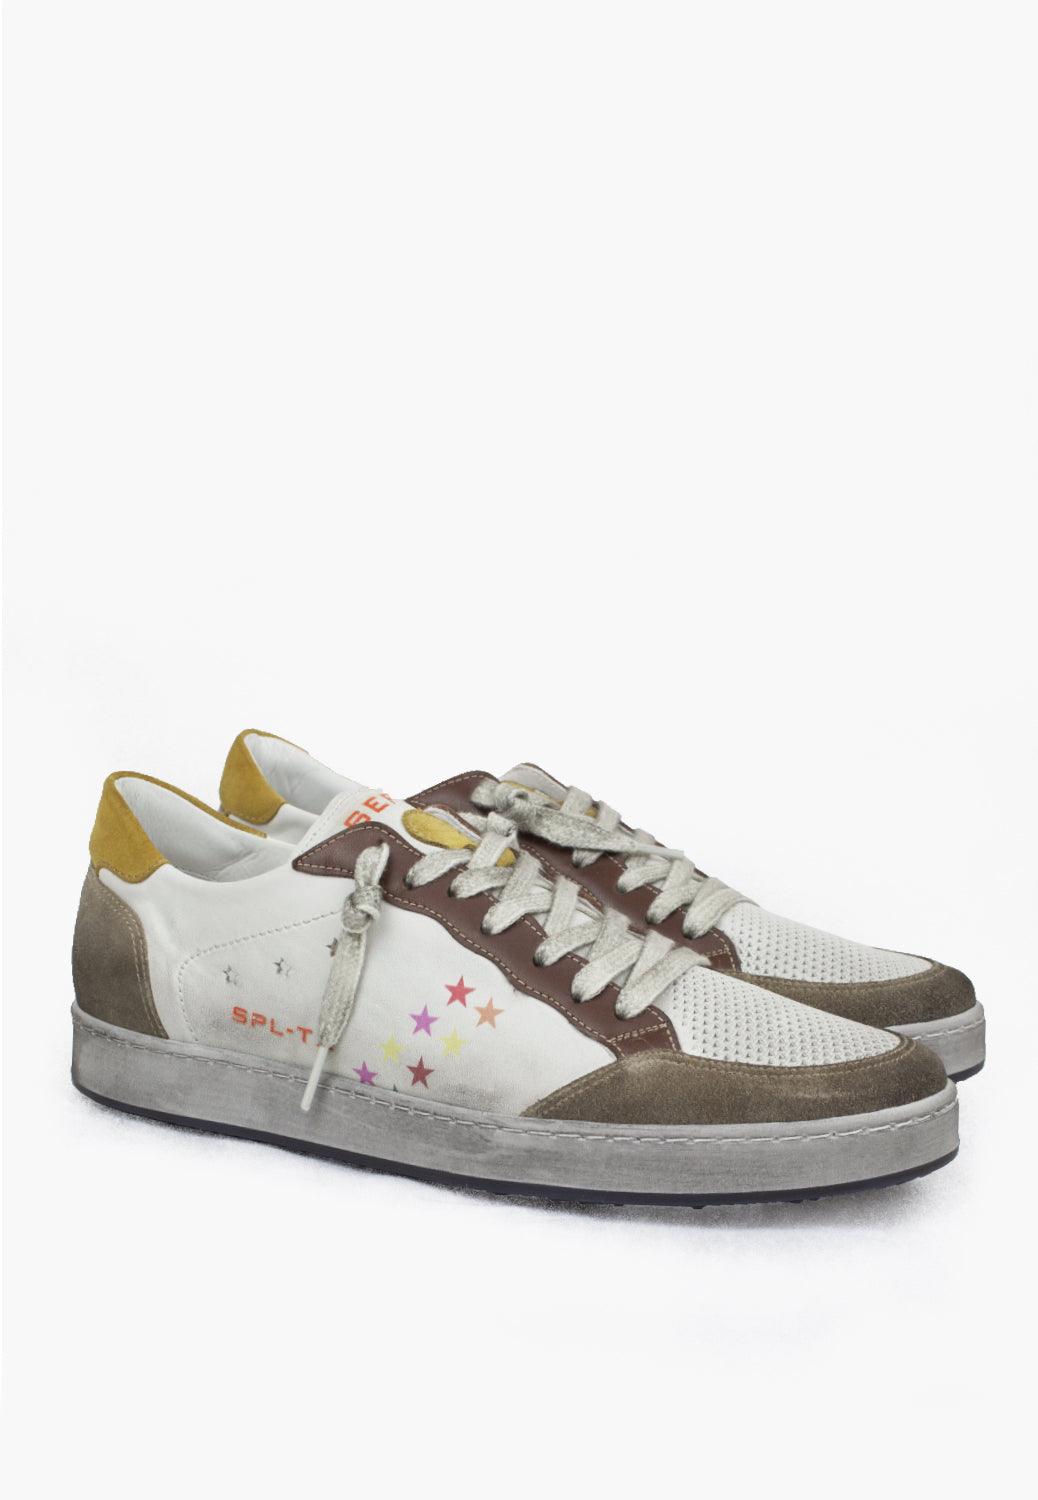 Constantinople Sneaker White Tan - SEPOL Shoes